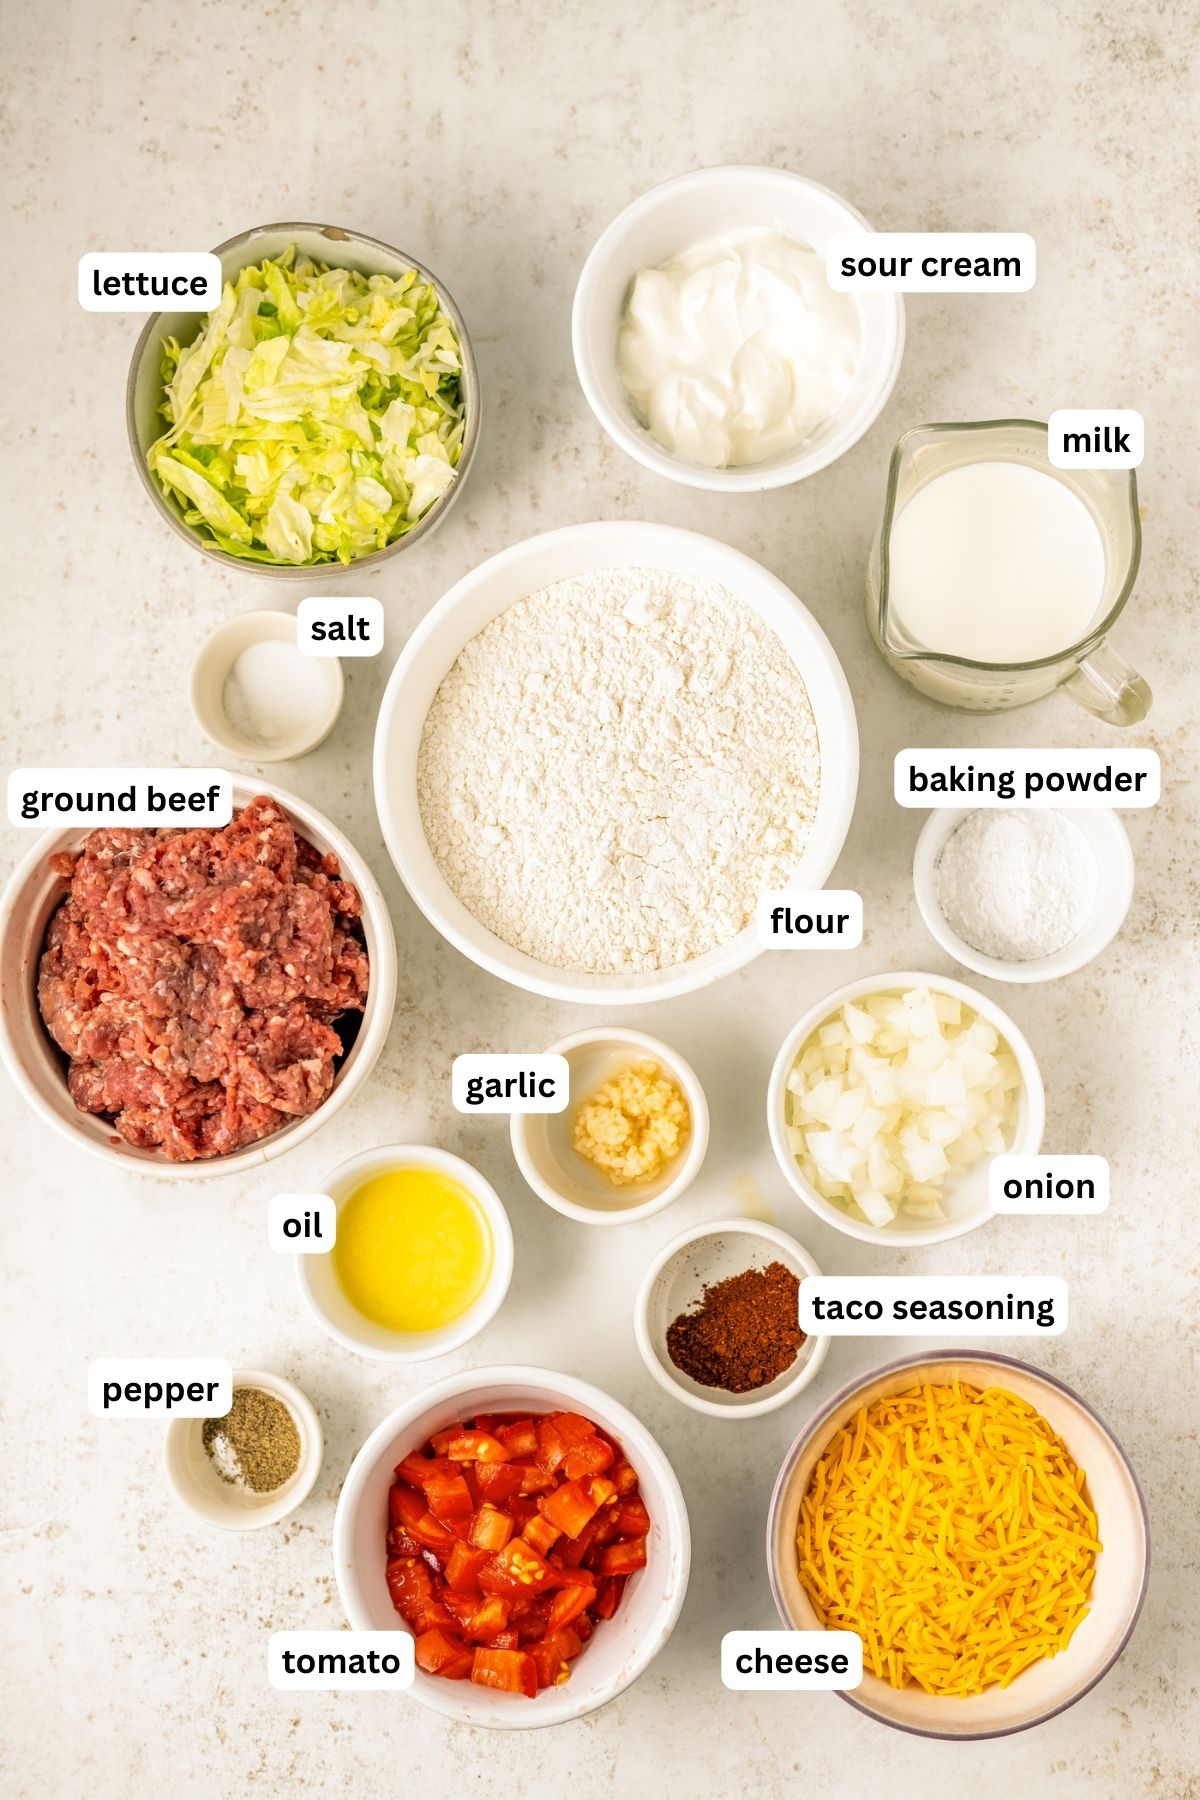 Ingredients for homemade Taco Bell chalupa recipe arranged in bowls. From top to bottom: lettuce, sour cream, milk, salt, flour, baking powder, ground beef, garlic, onion, oil, taco seasoning, pepper, tomato and shredded cheese.